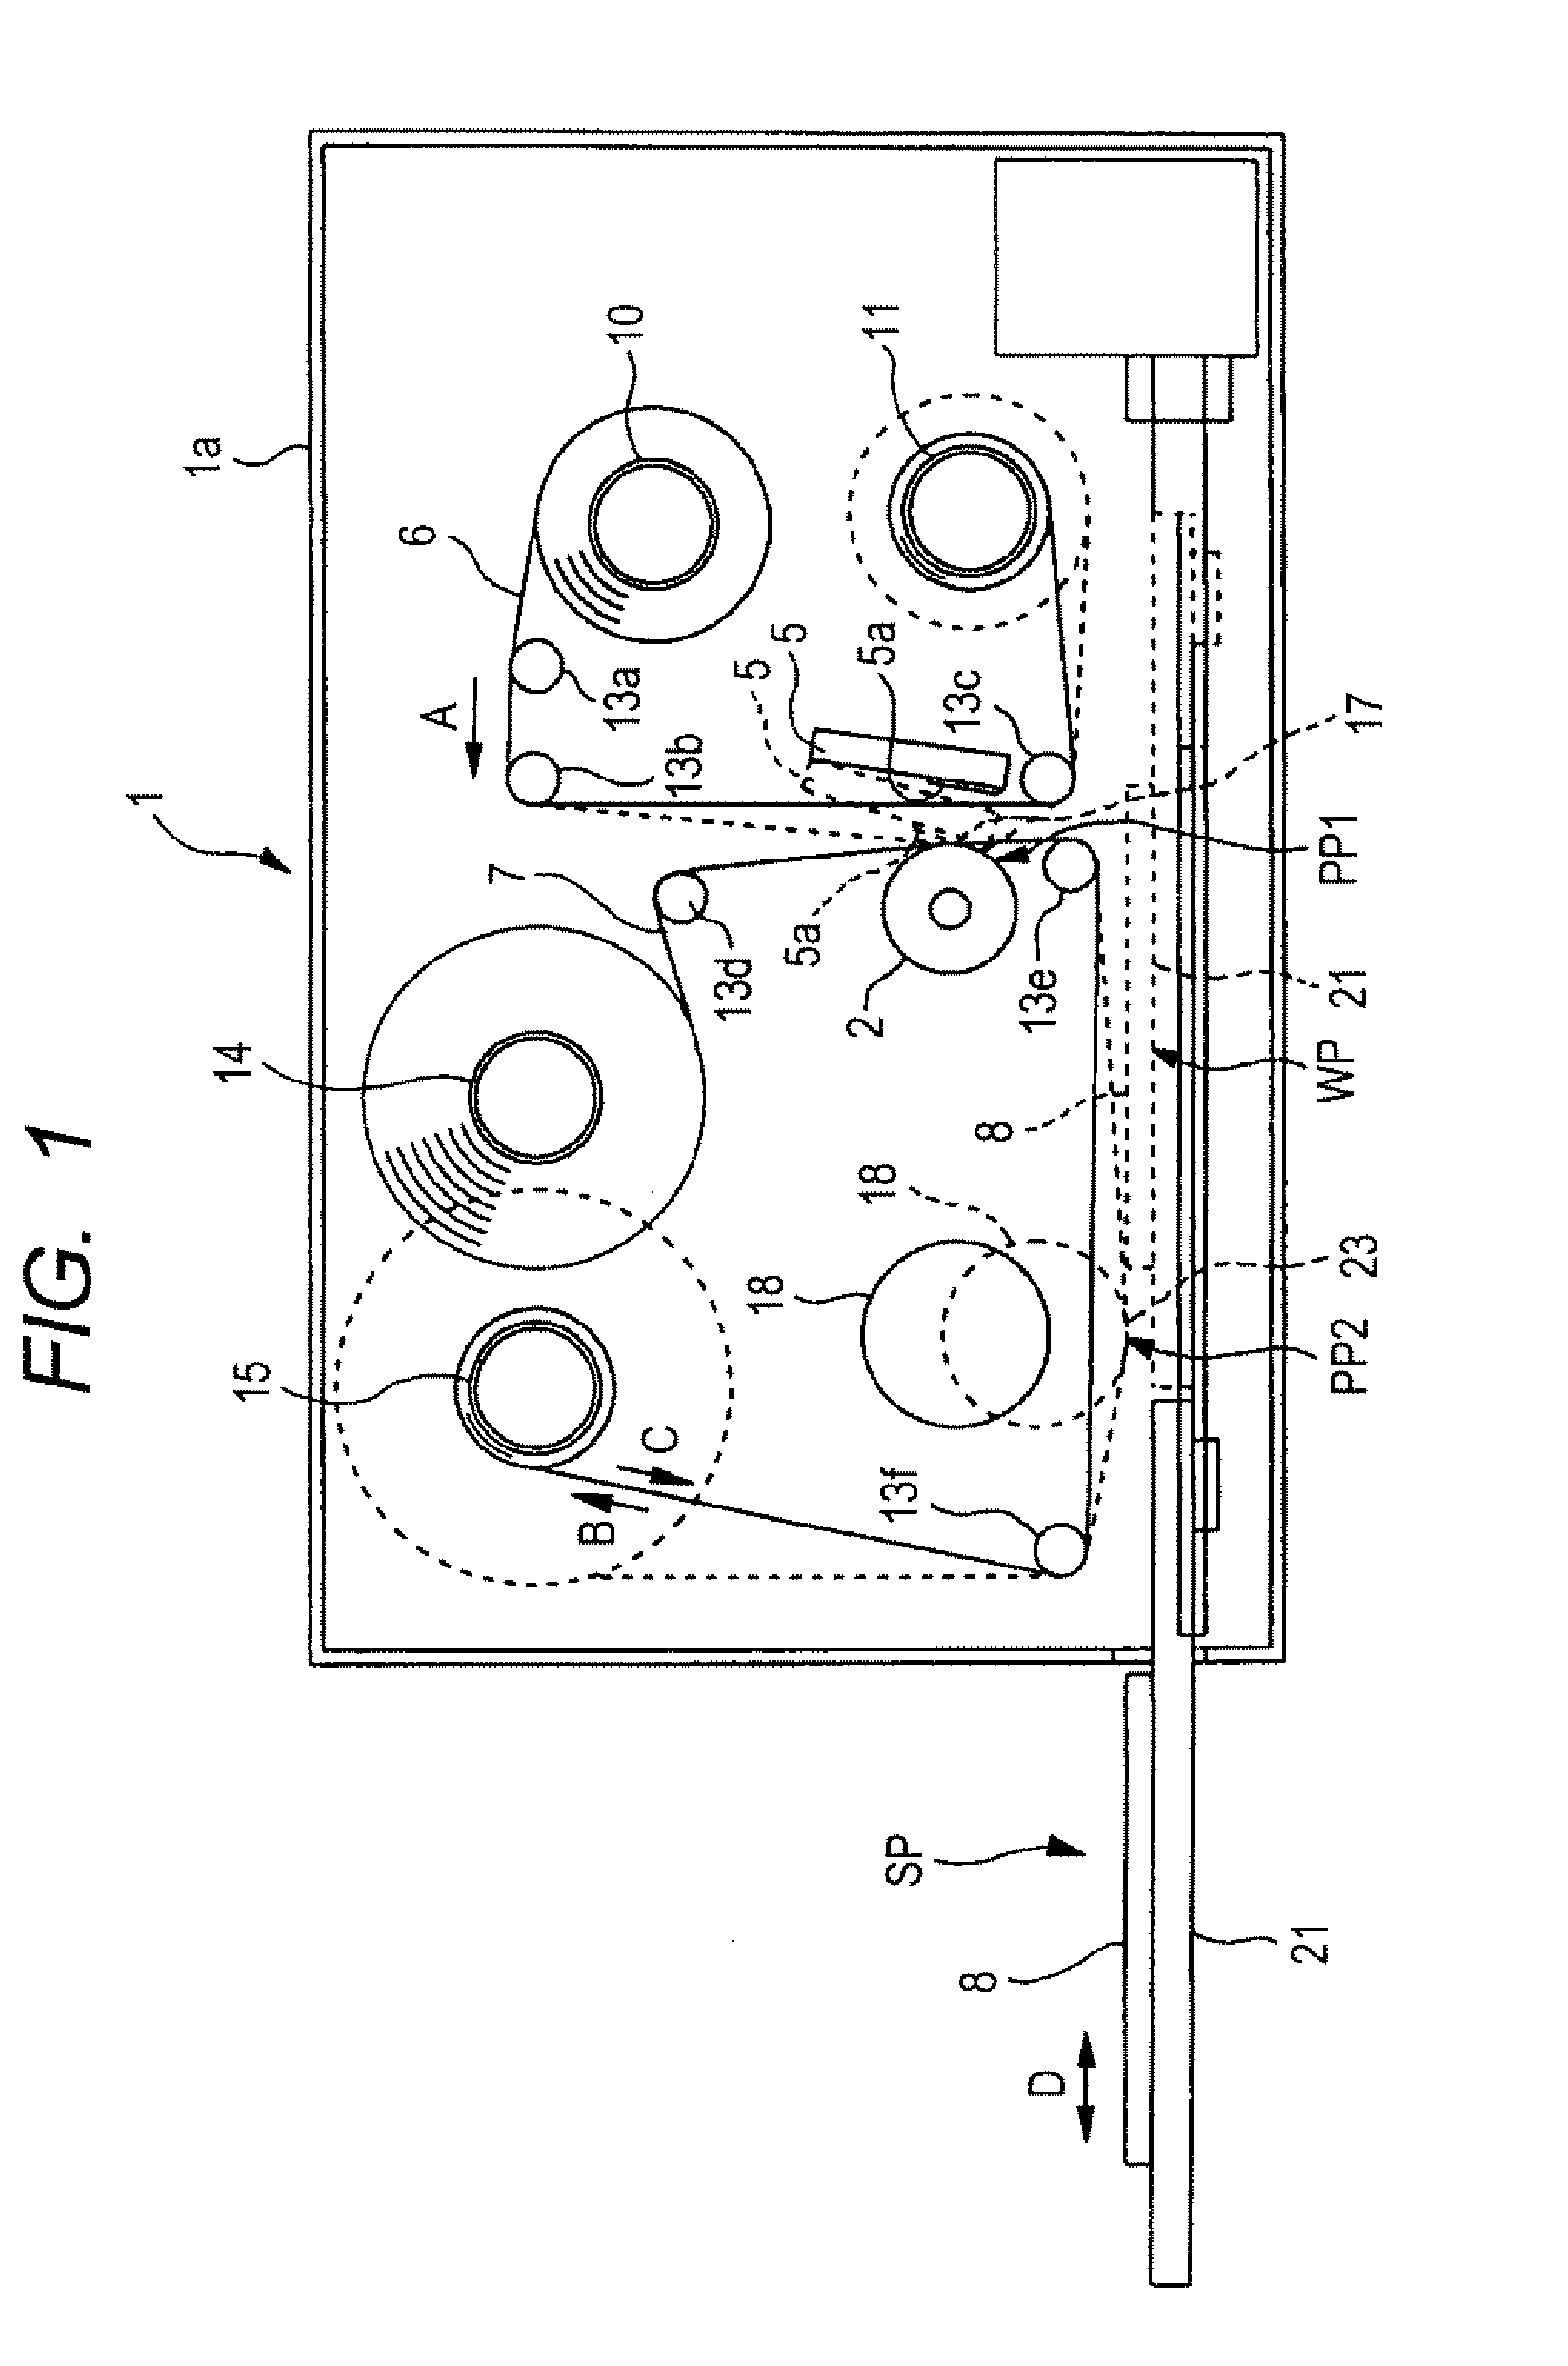 Intermediate transfer medium conveying device and thermal transfer line printer using the same